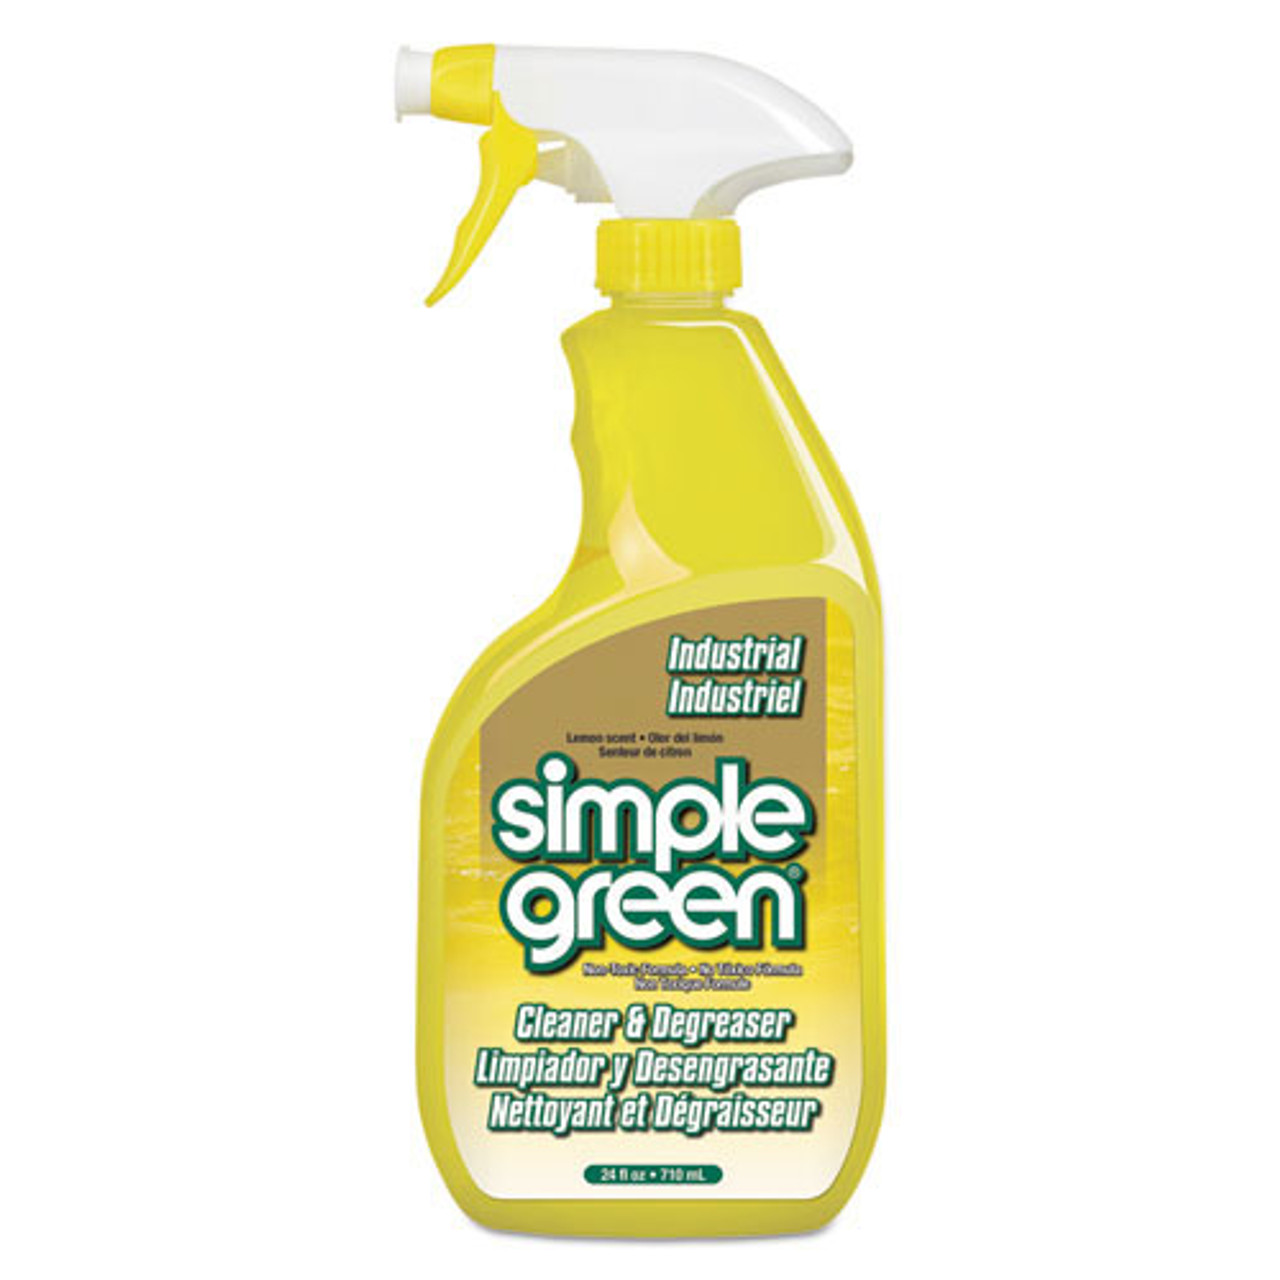 Simple Green all purpose cleaner lemon scent trigger